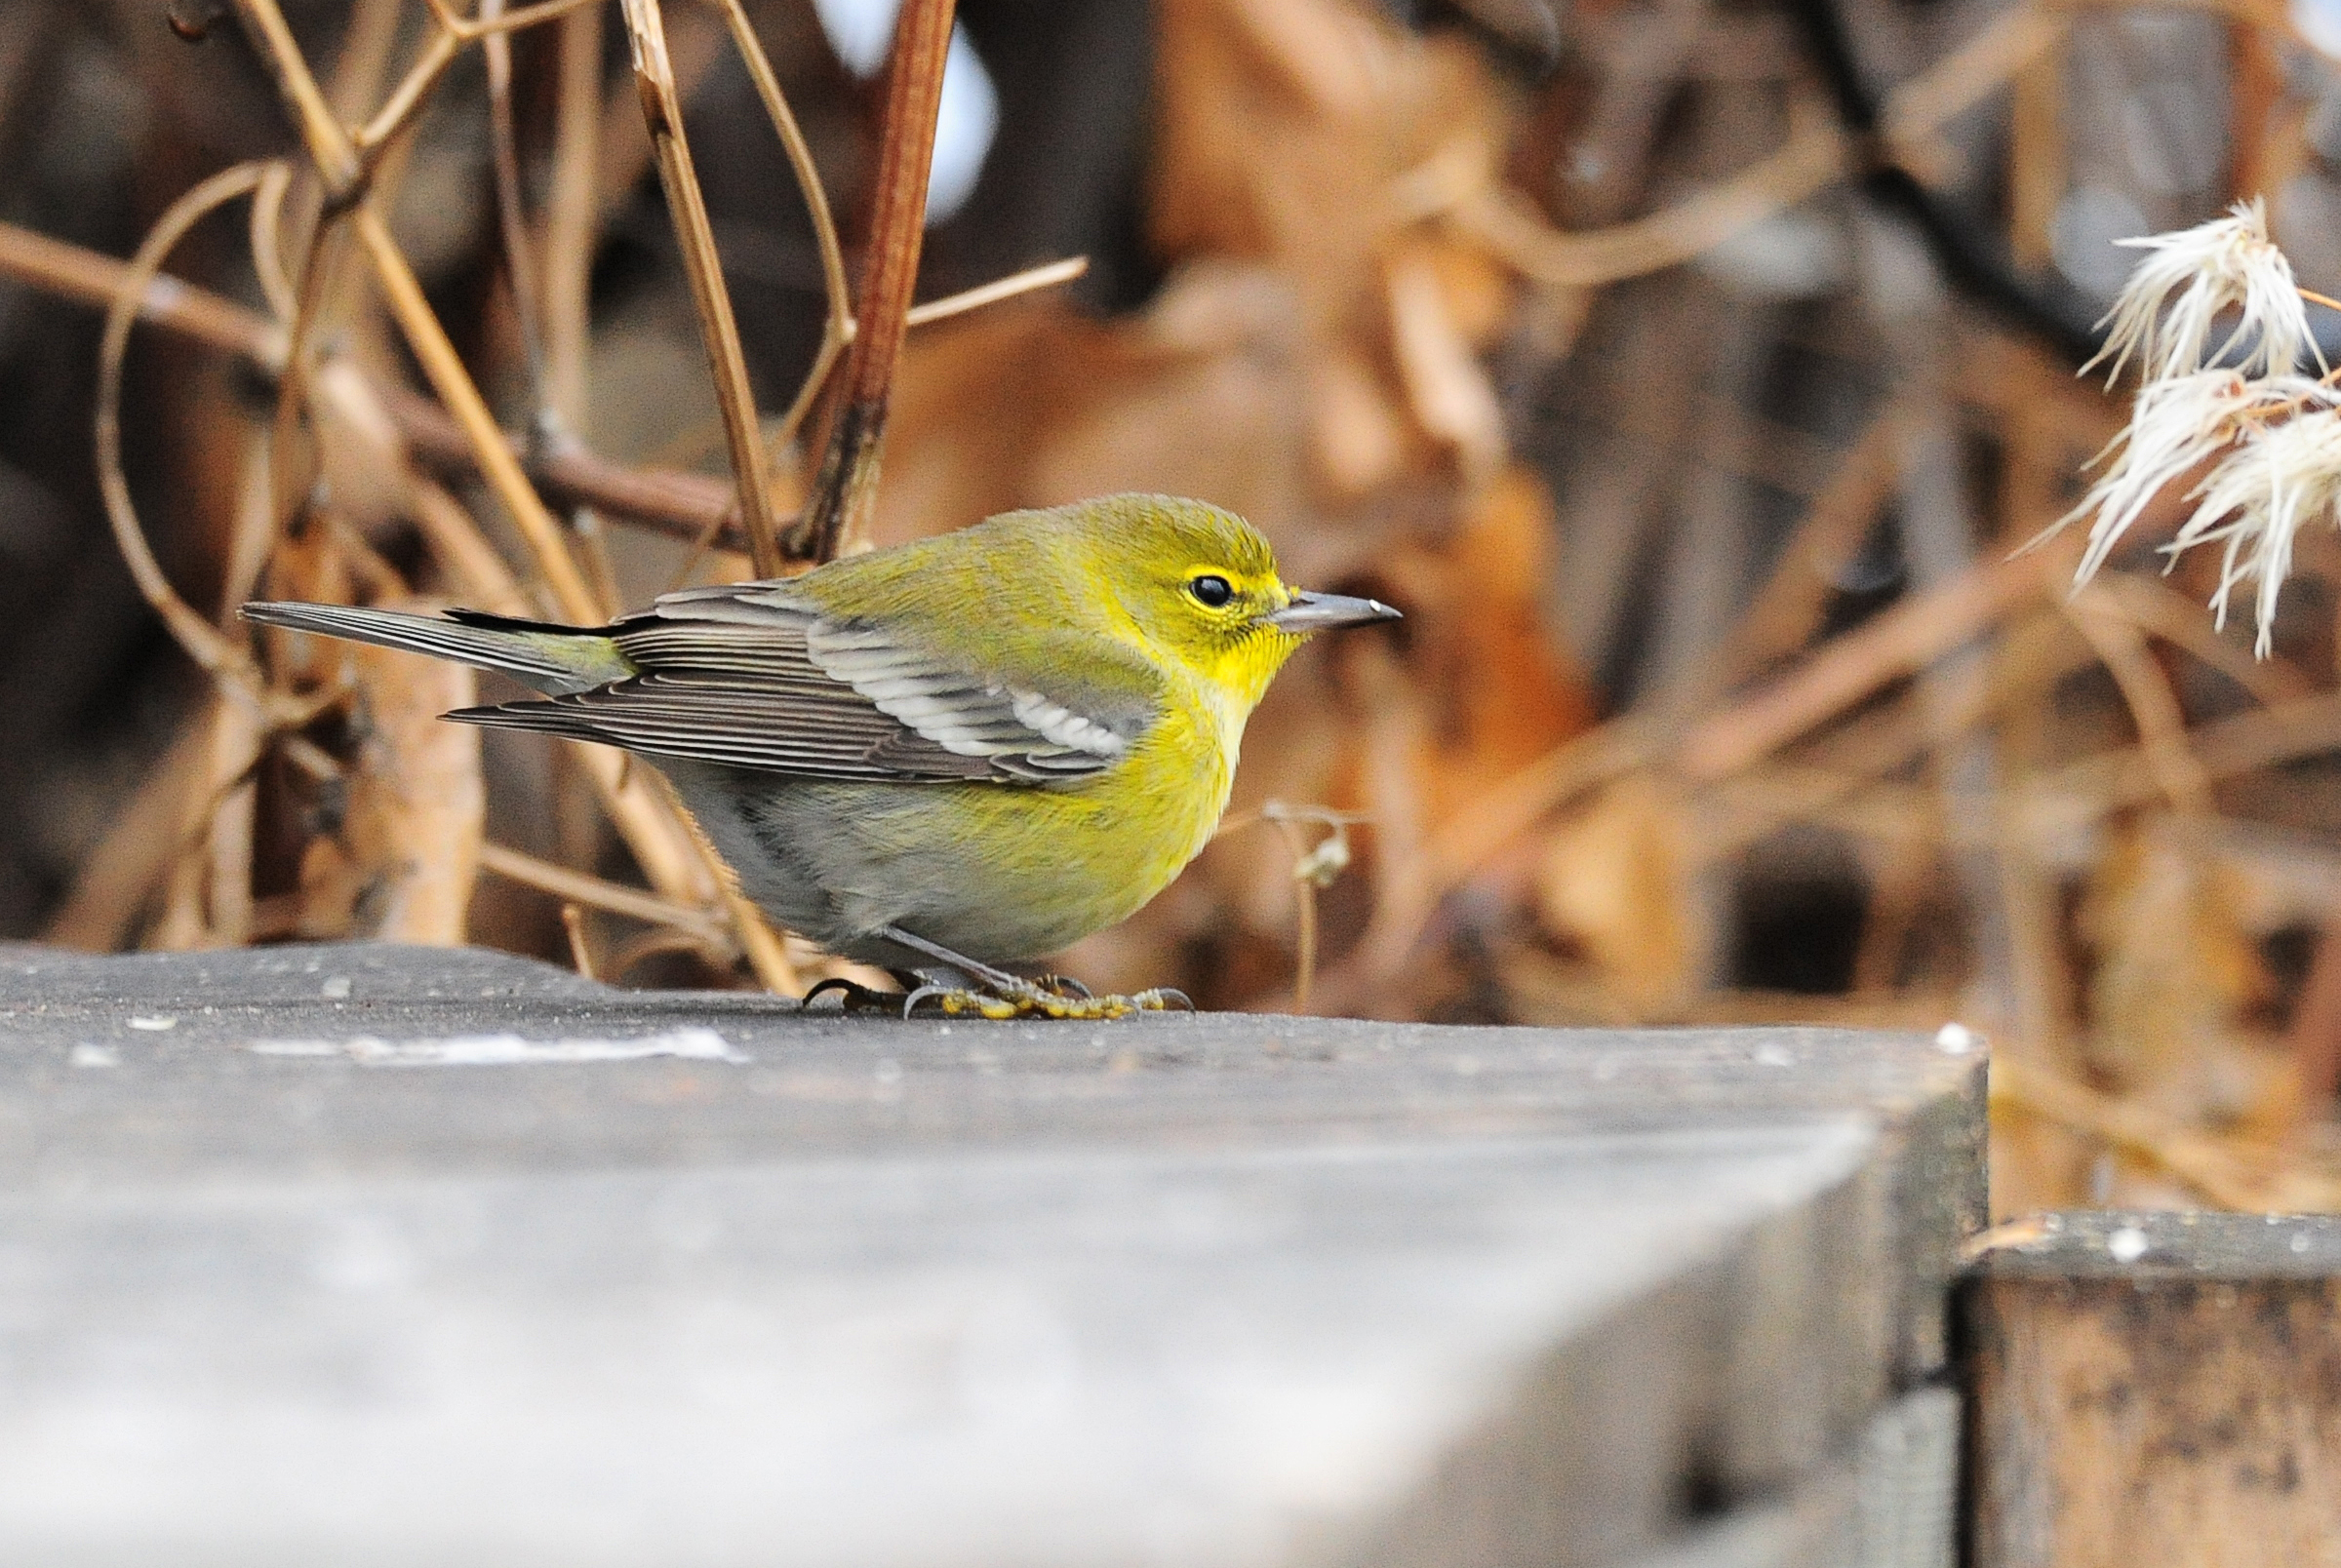 Pine Warbler was first seen at a feeder at Sylvan Lake on November 3, 2015 and last seen on November 6.